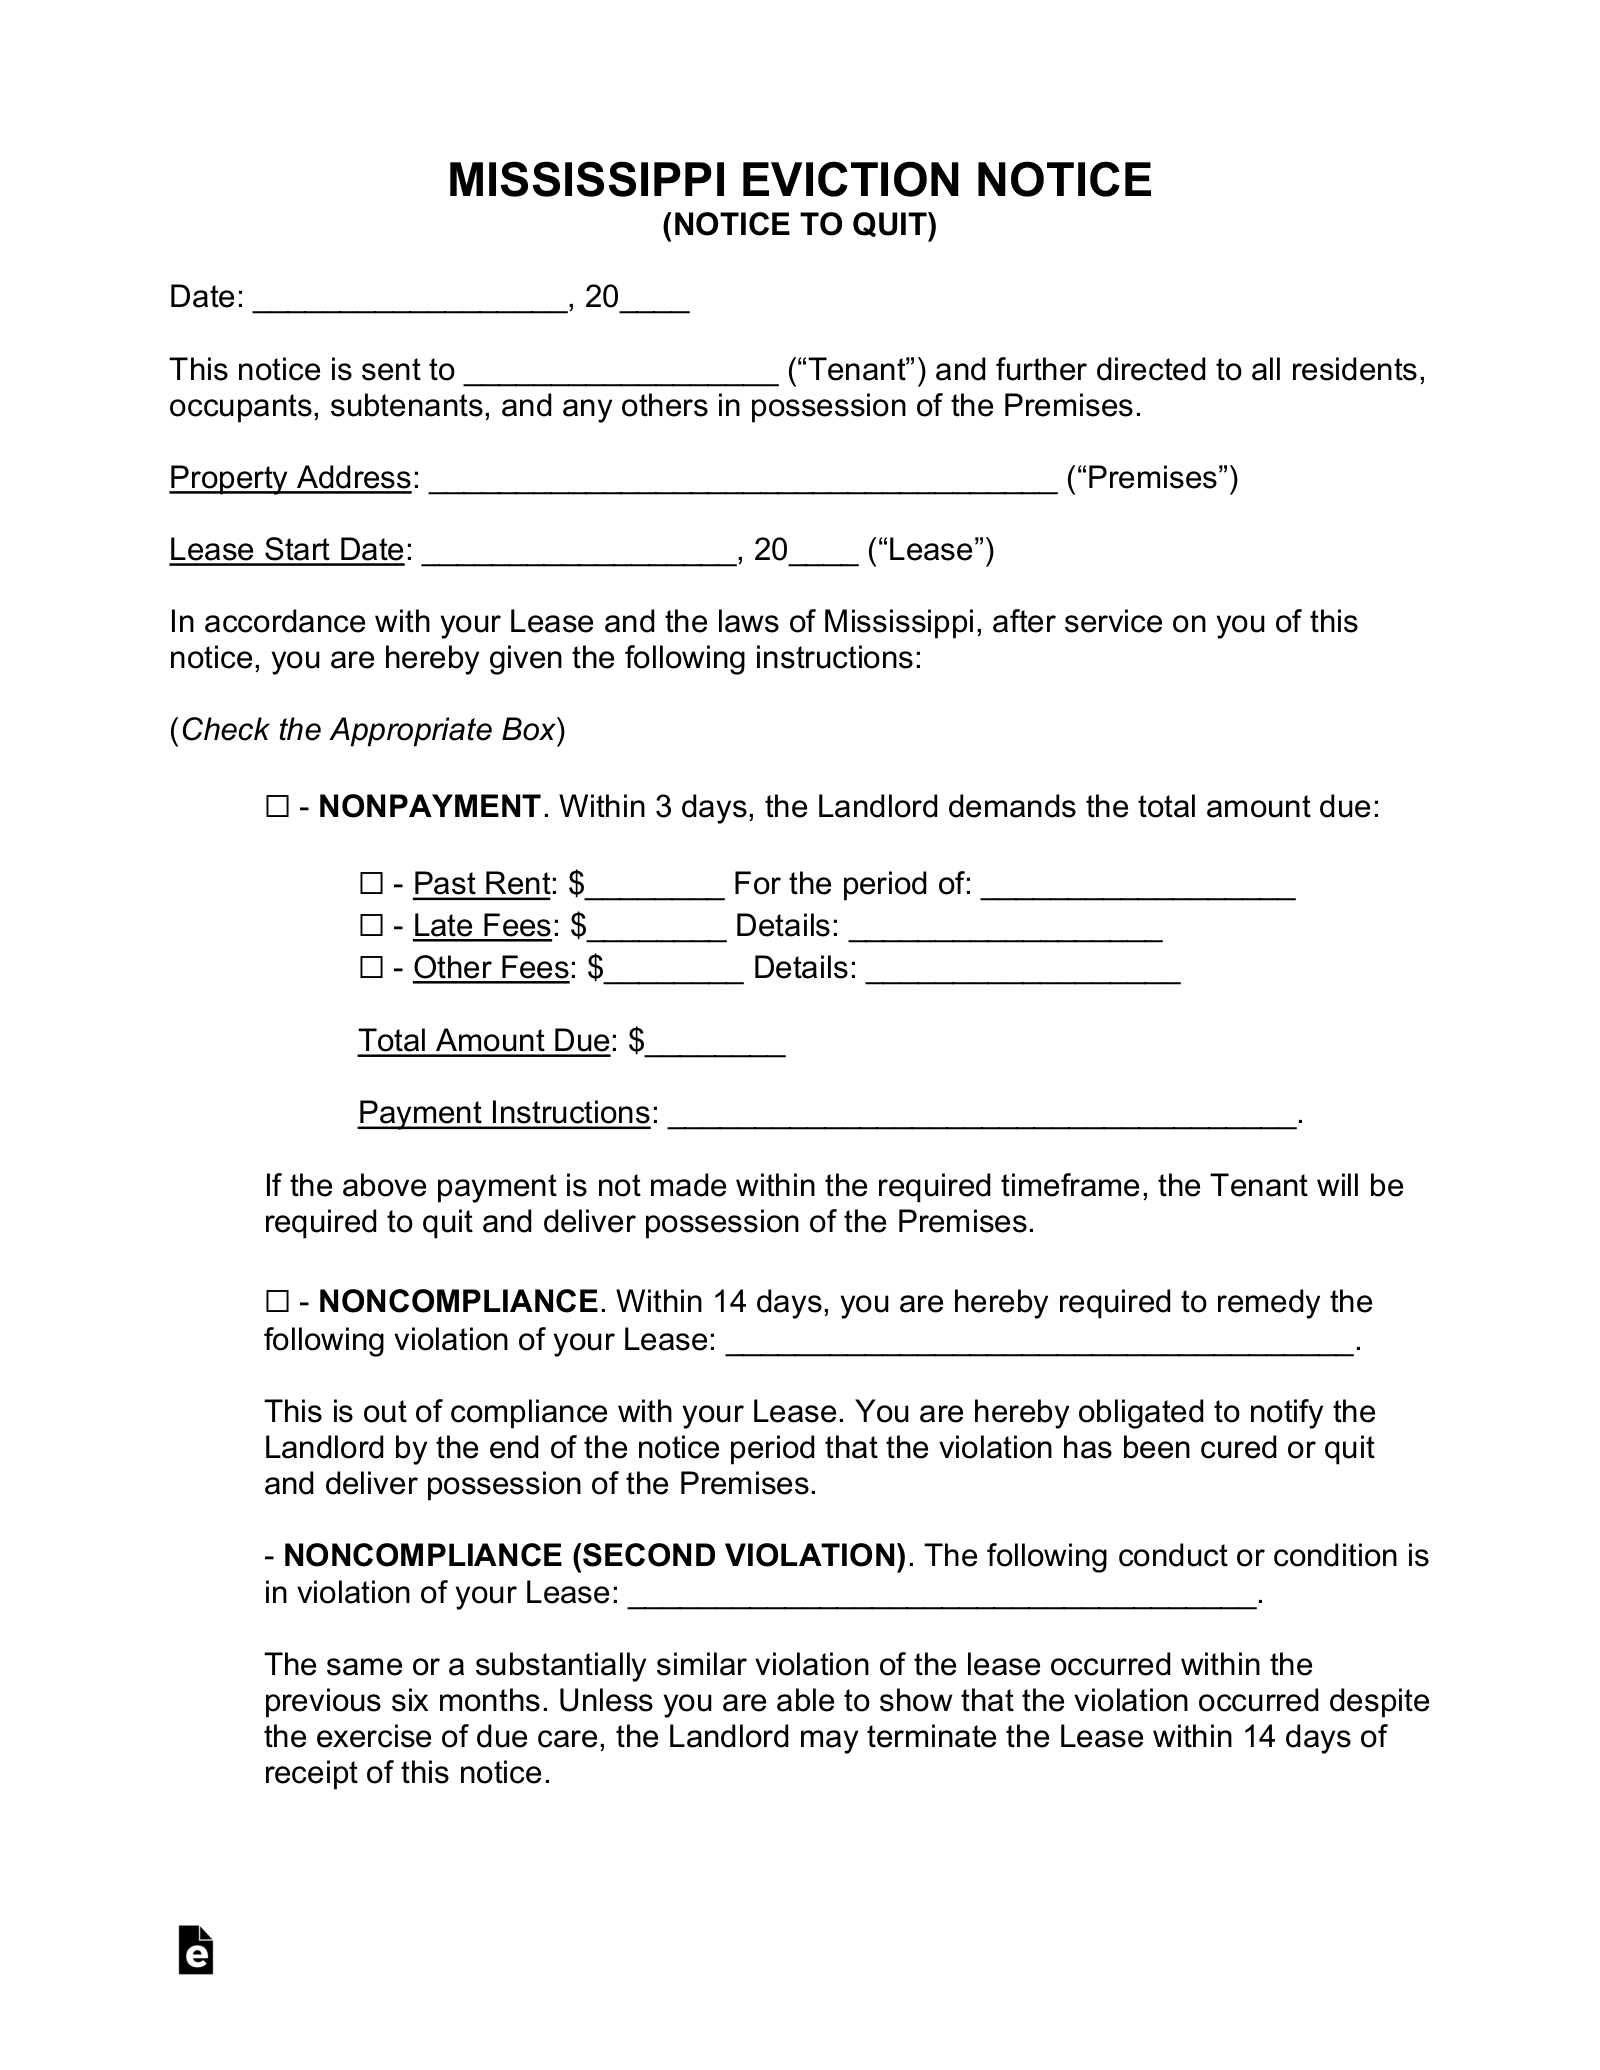 free-mississippi-eviction-notice-forms-3-pdf-word-eforms